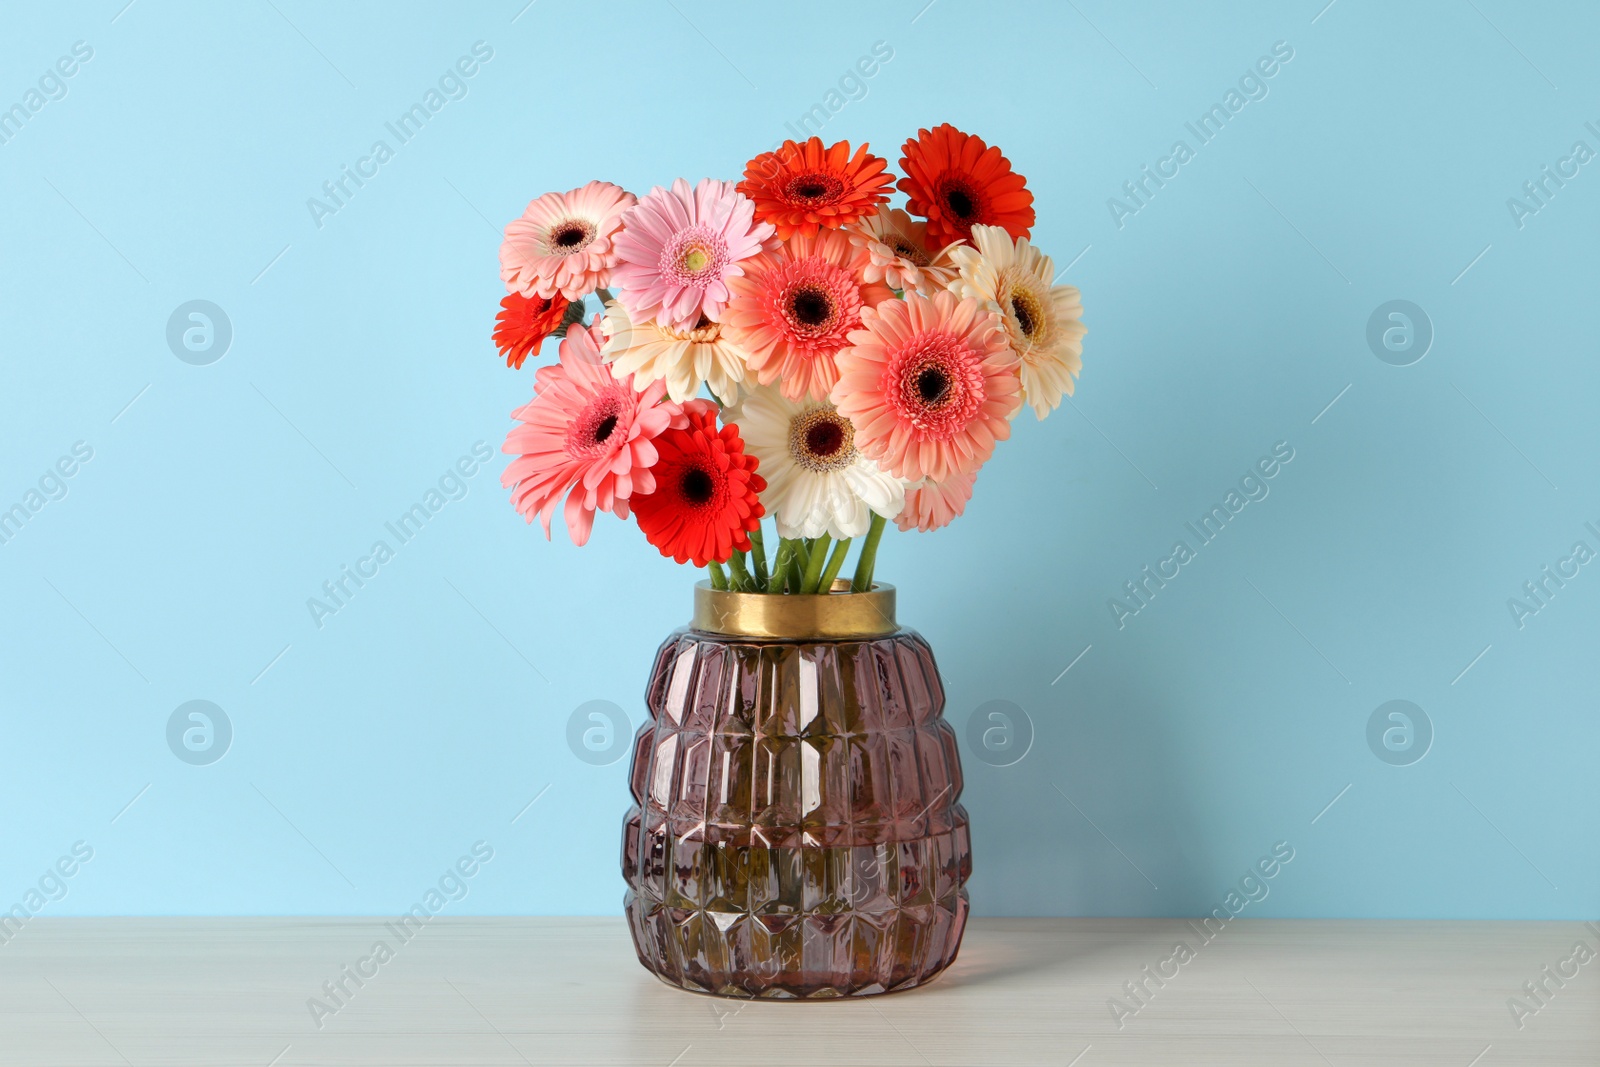 Photo of Bouquet of beautiful colorful gerbera flowers in vase on table against light blue background